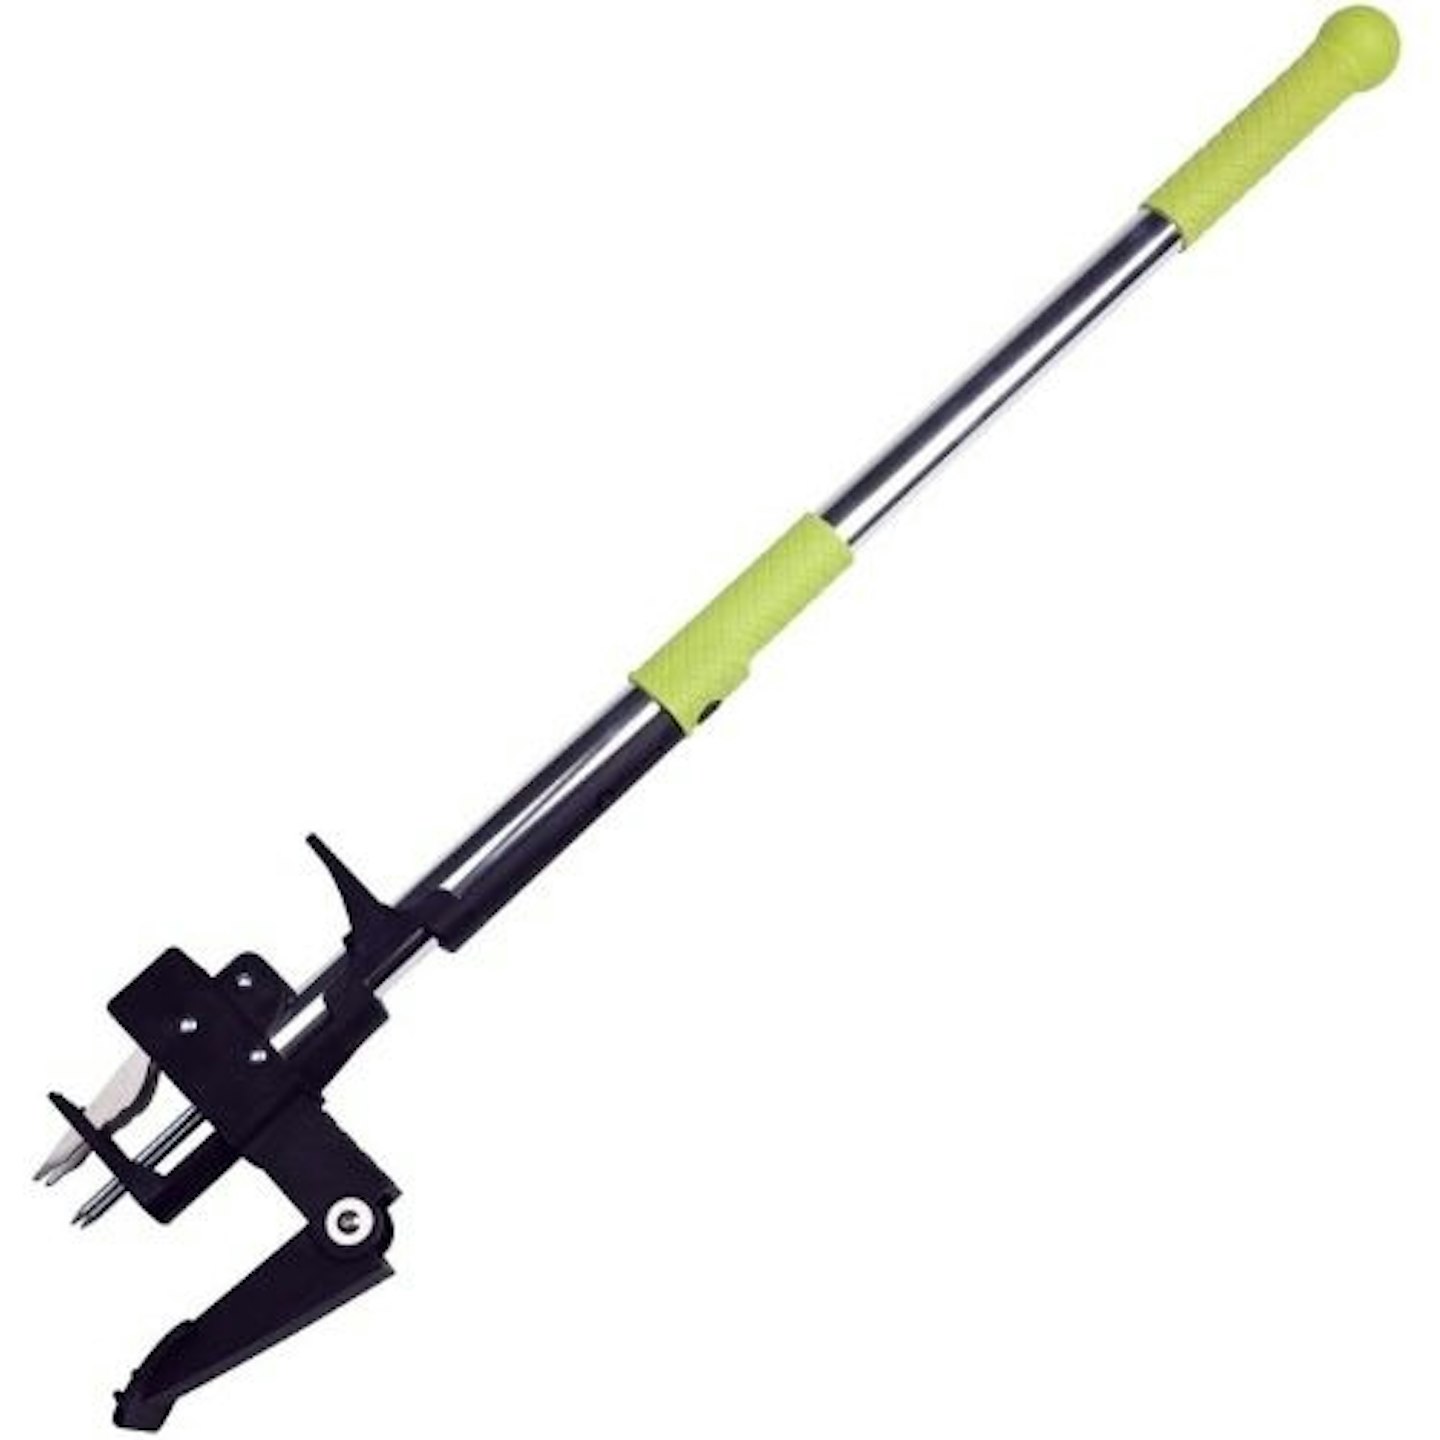 ORIENTOOLS Weeder Tool with 4 Claws